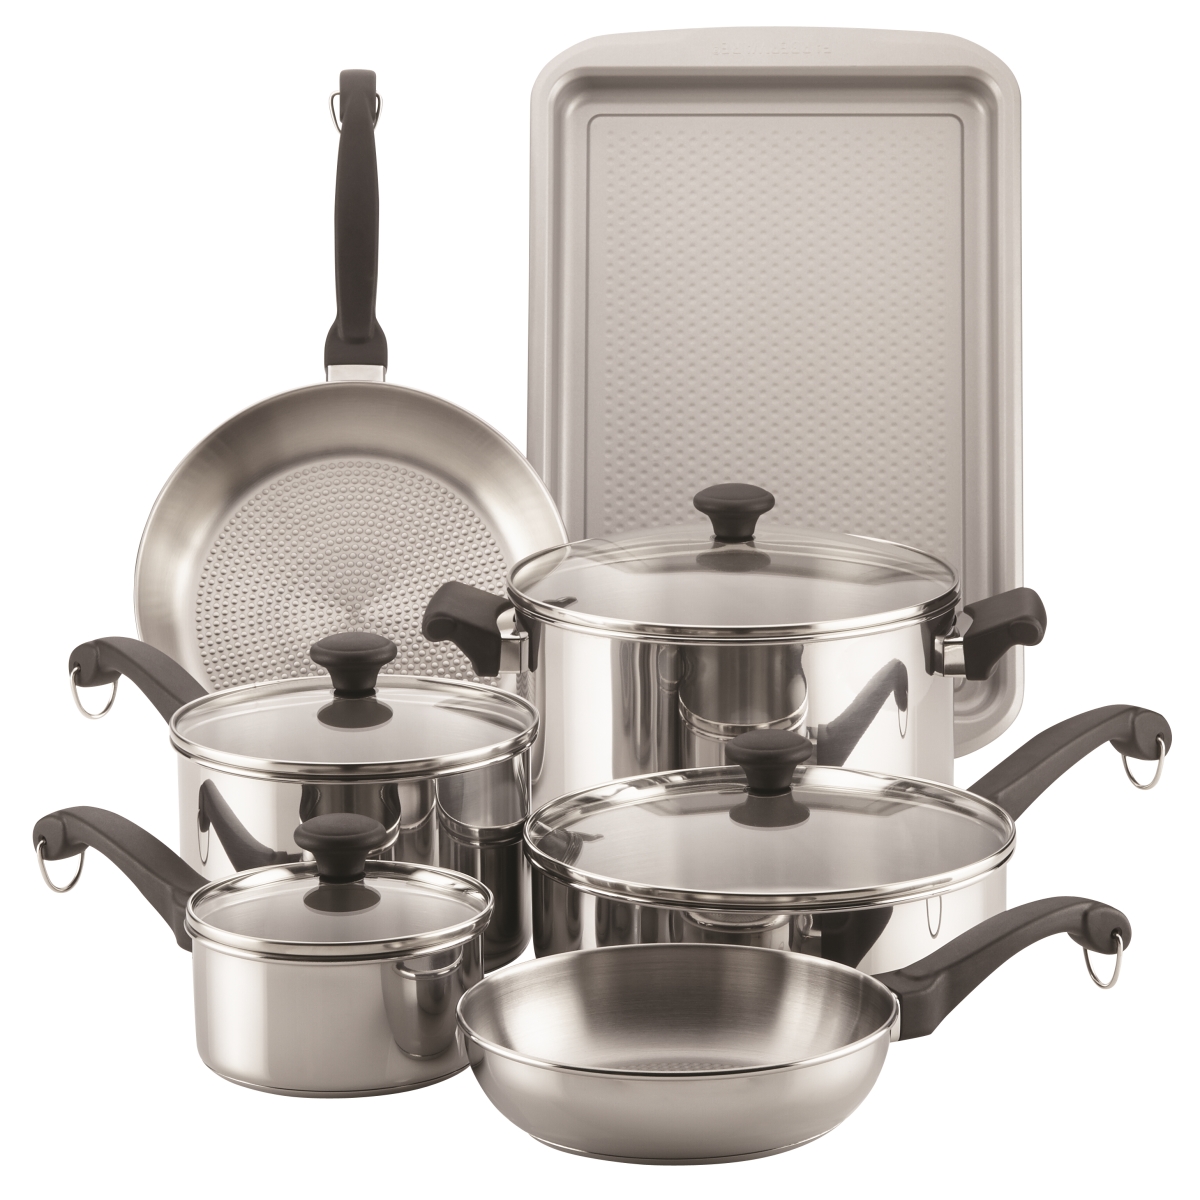 70217 Classic Traditions Stainless Steel Cookware Set - 12 Piece